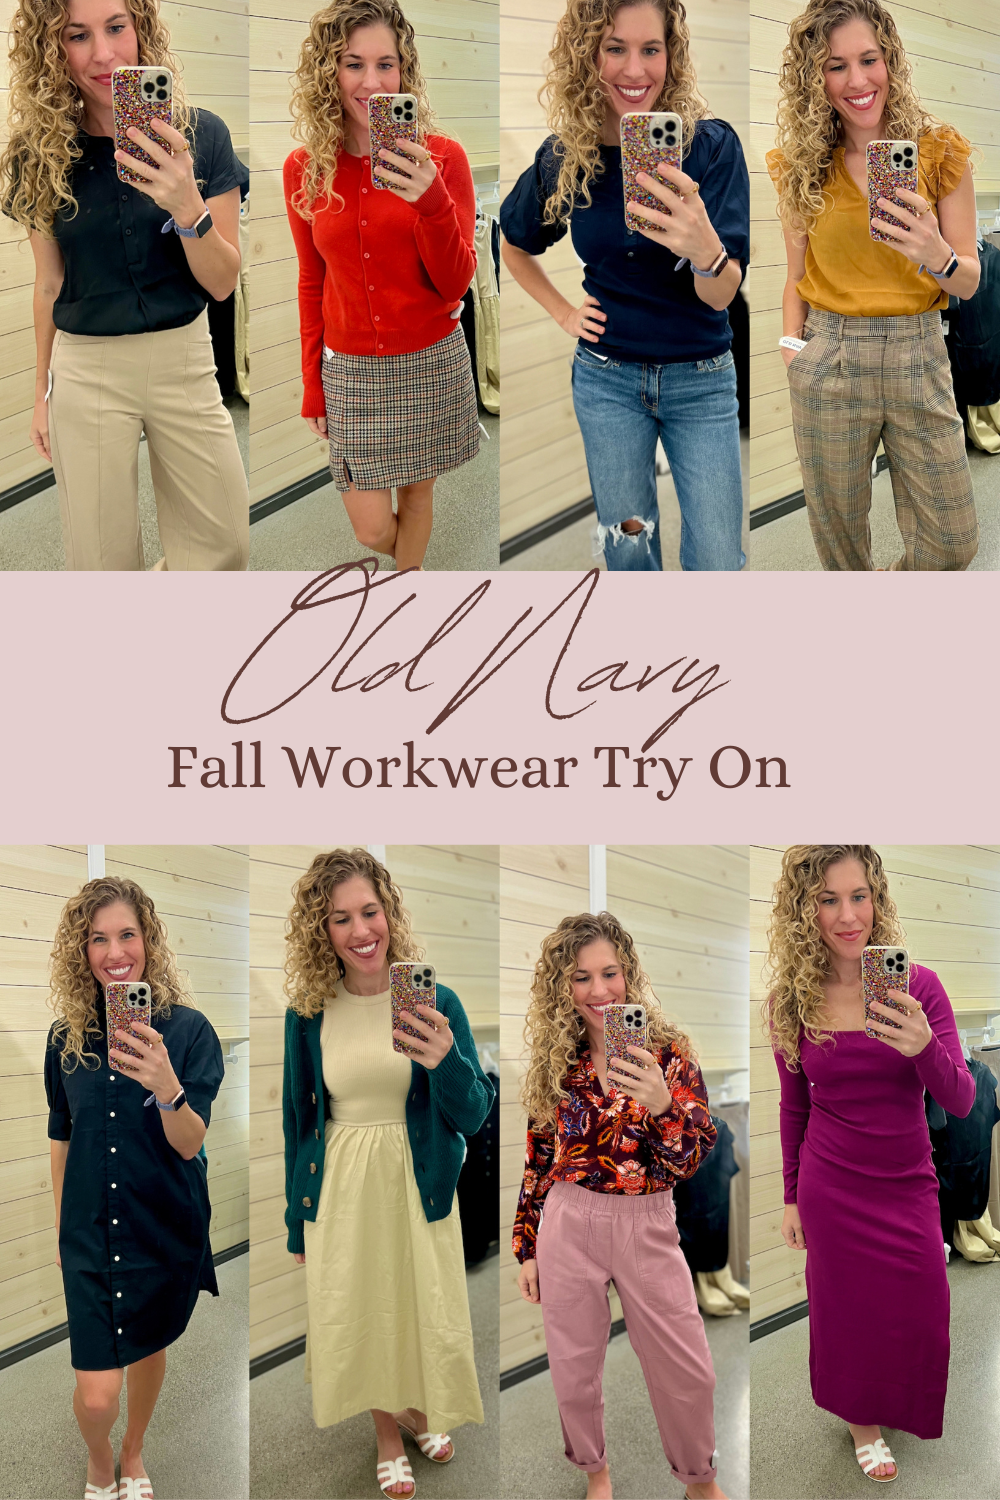 Huge Old Navy Fall Workwear Try-on & Confident Twosday Linkup